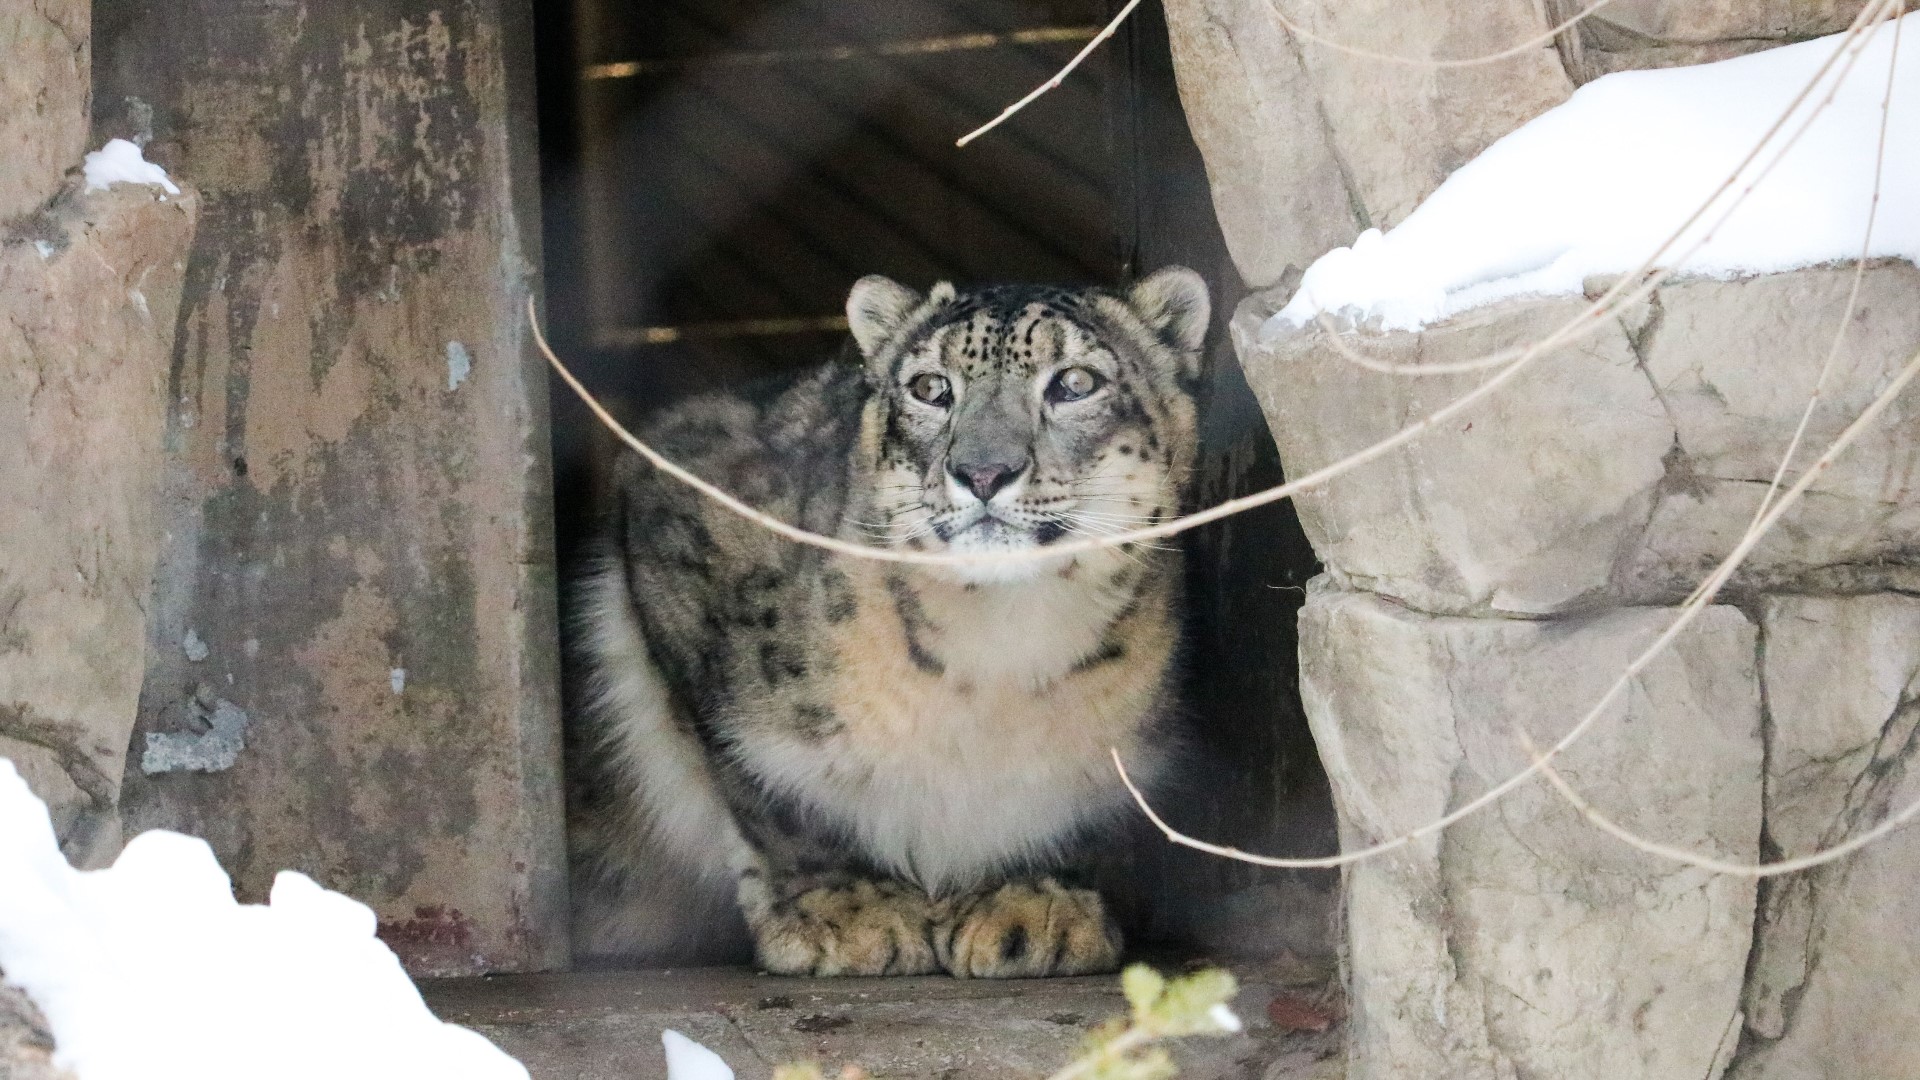 Snow leopards typically live in the mountains of central and south Asia.